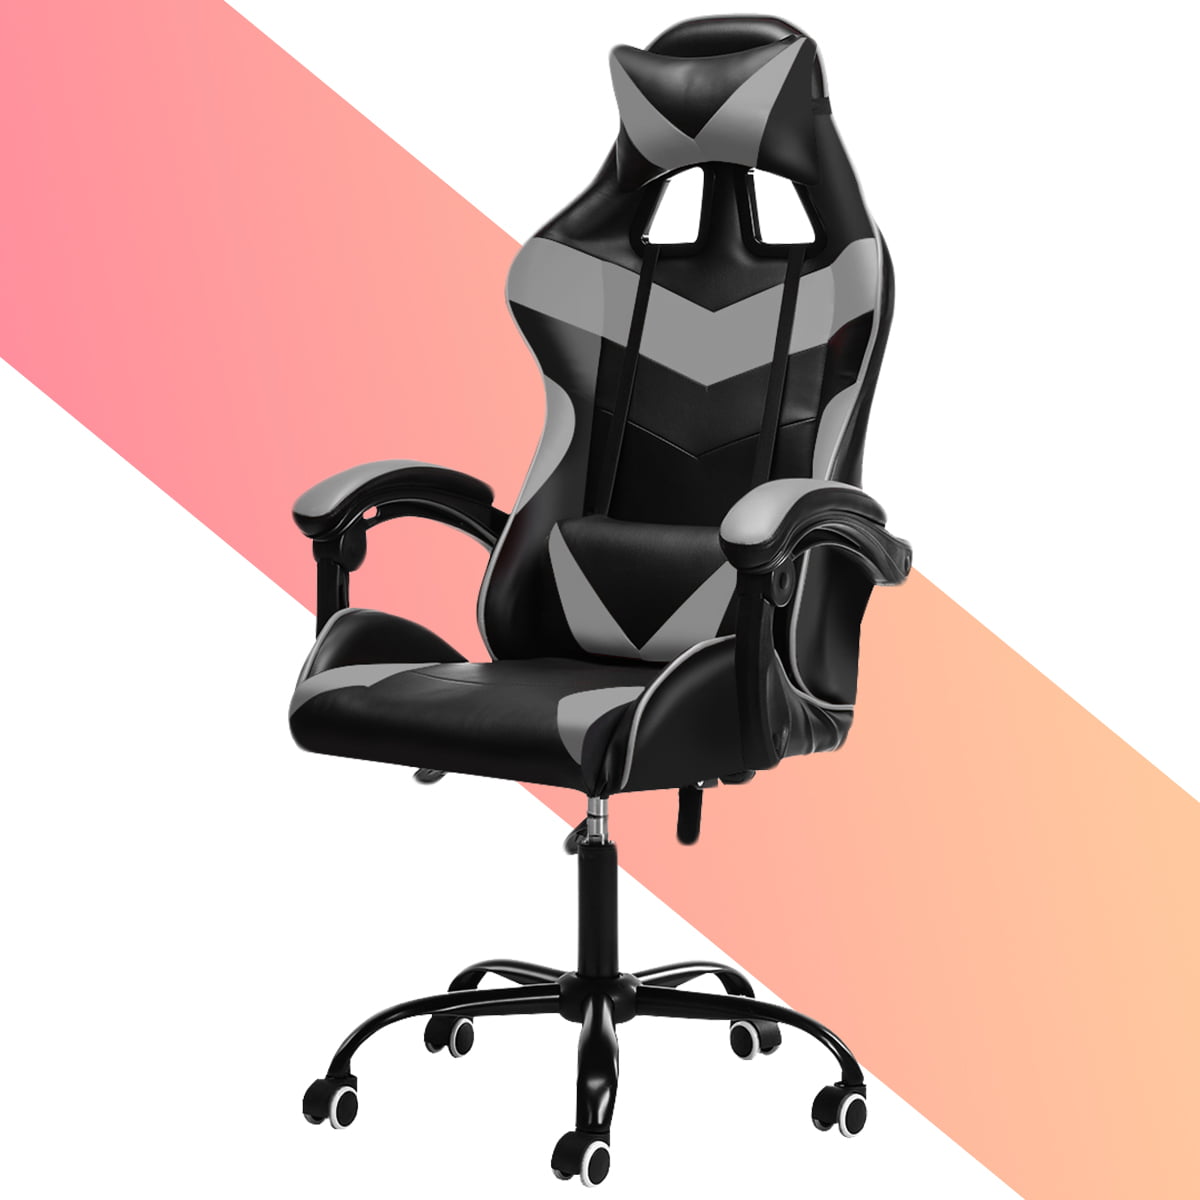 Recliner Chair BIFMA Certified Black/Grey Gaming Chair Yoleo Ergonomic Computer Gaming Chair Adjustable Armrest High Back Office Chair Mute Casters Desk Chair with Lumbar Support and Headrest 